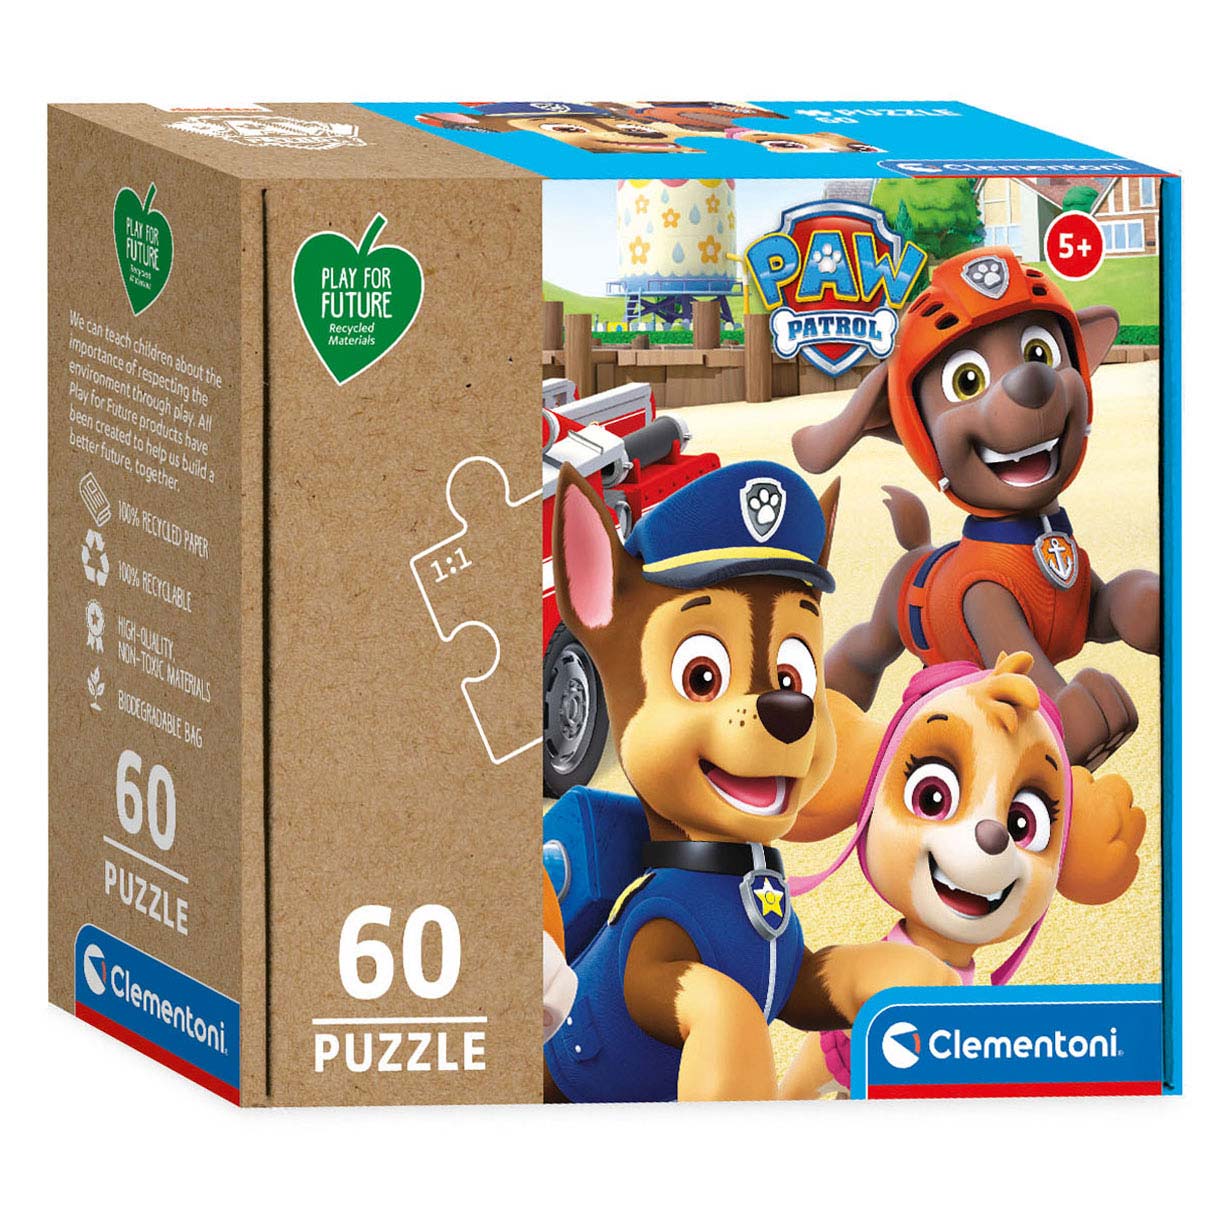 Clementoni Play for Future Puzzel - PAW Patrol, 60st.